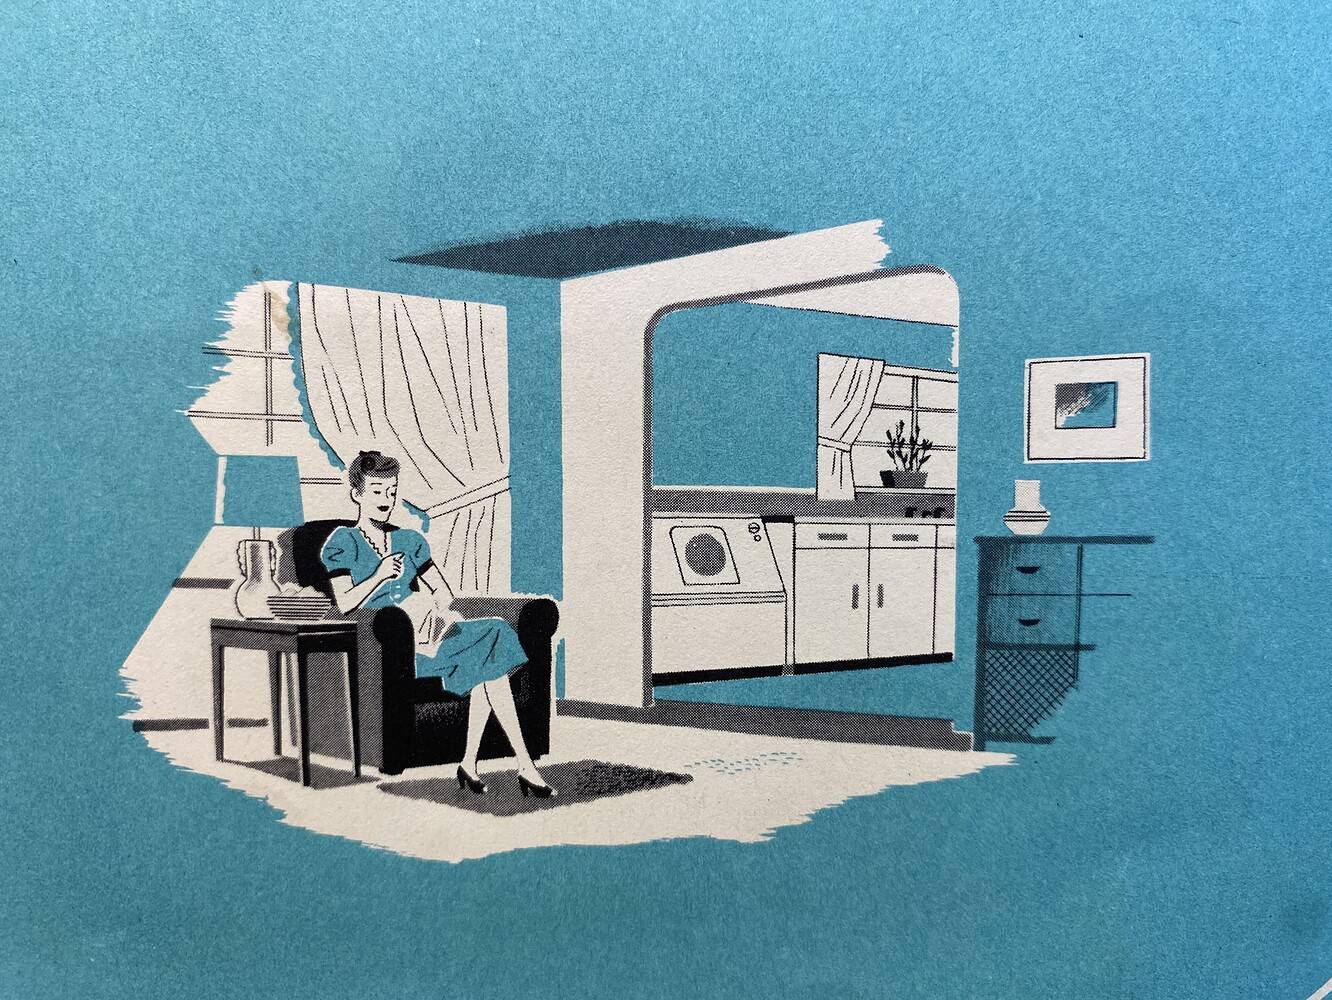 An illustration from a Mid-Century washing machine brochure featuring a woman sitting in an armchair in a living room . She is working on a sewing project in front of a window which is shining light into the room. There is an entryway to her left which leads into the kitchen. A washing machine and sink can be seen near a window with drapery.